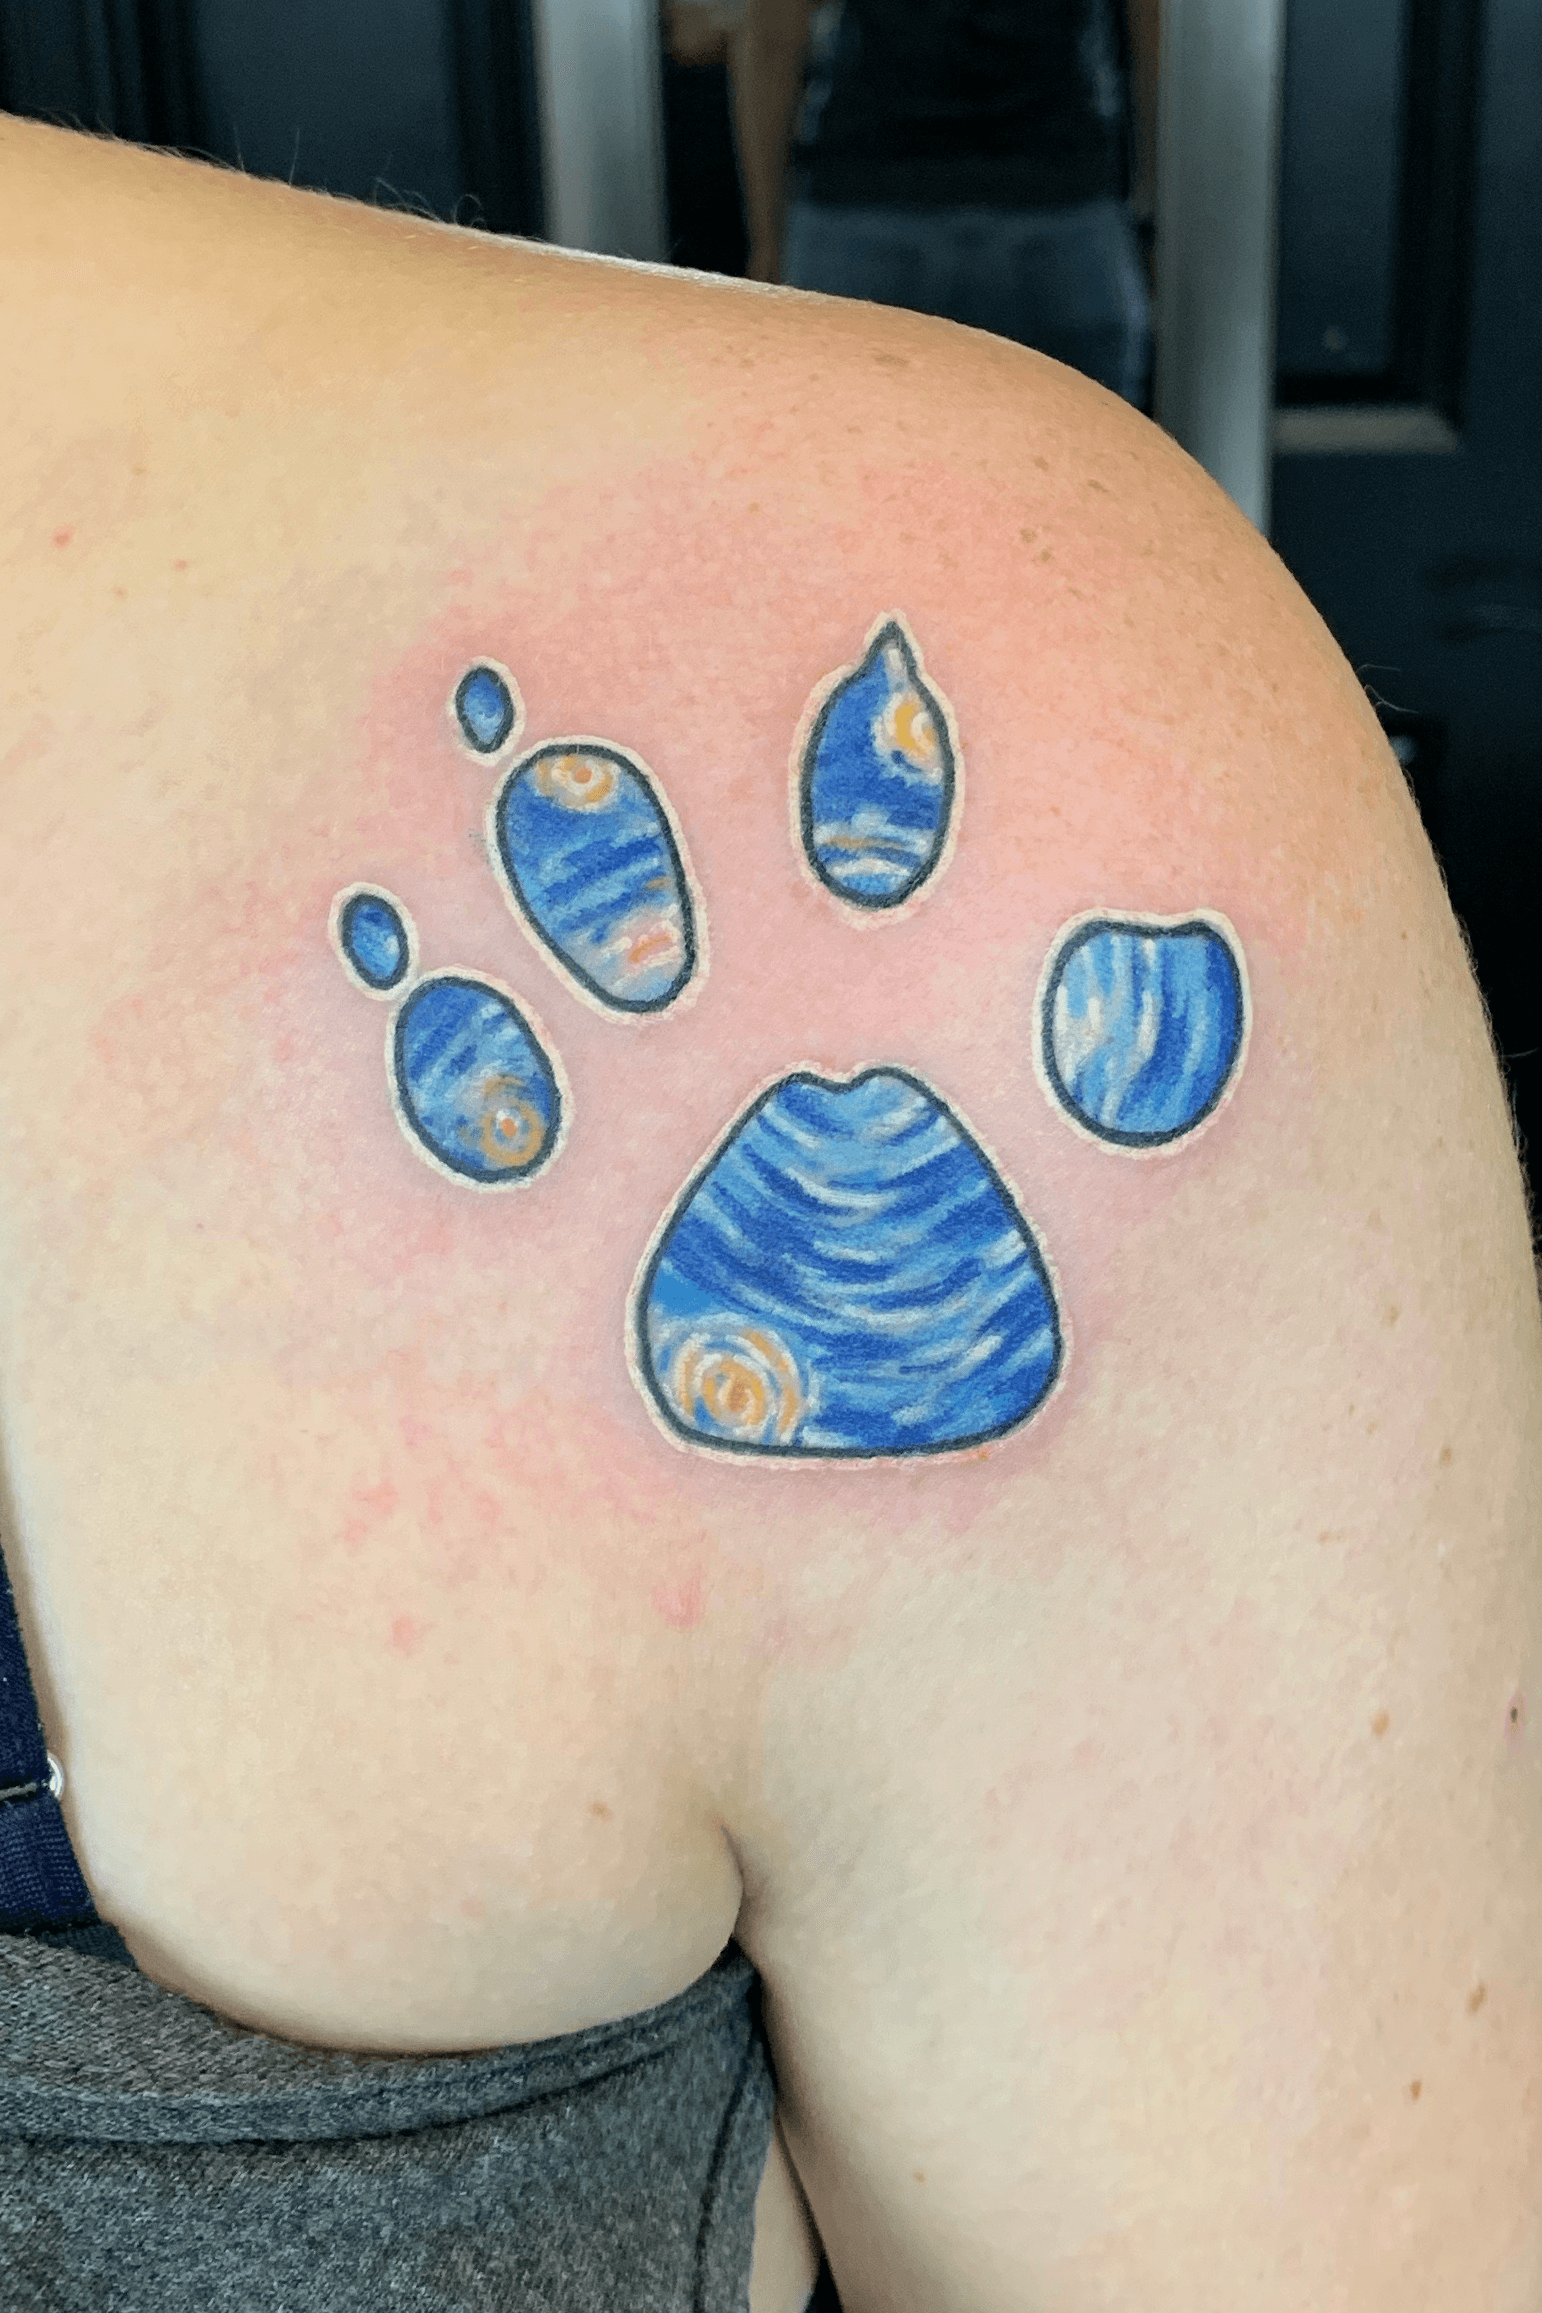 People are Branding Themselves with Dog Paw Tattoos